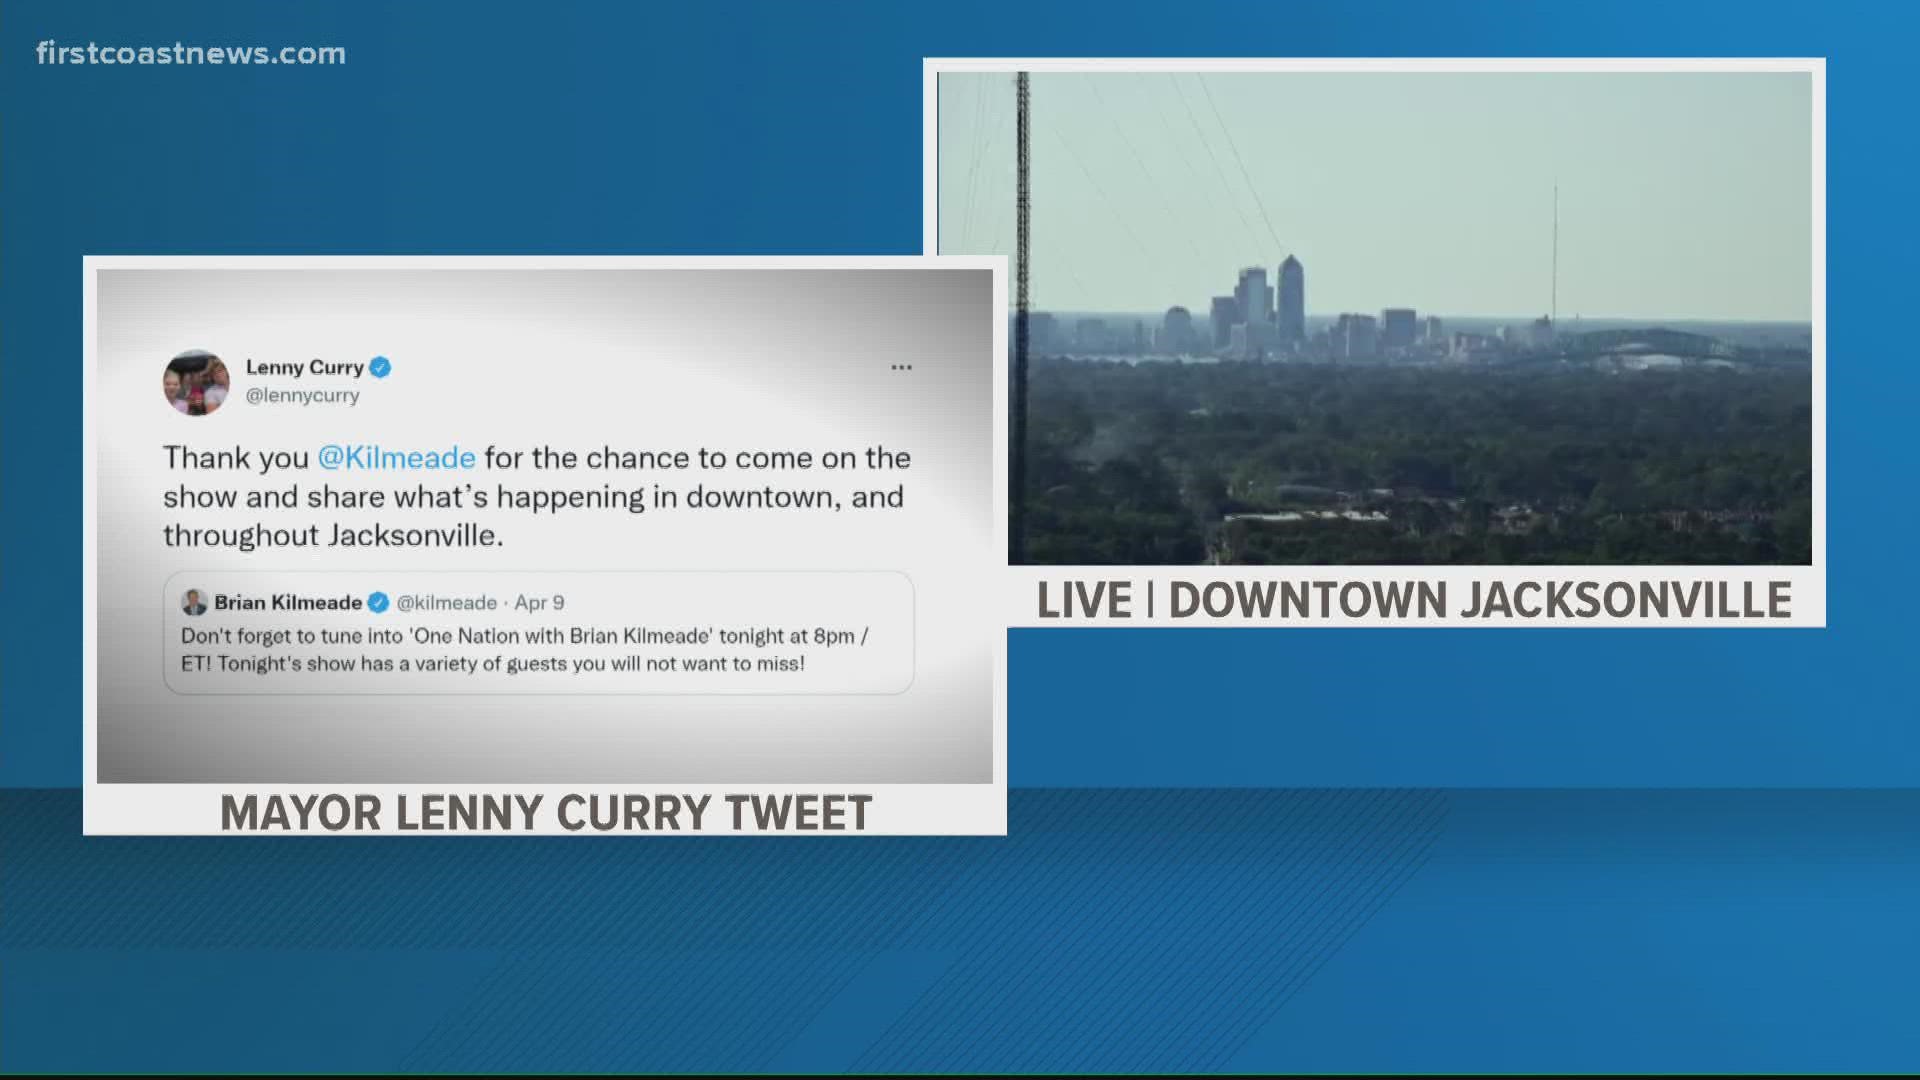 Curry shared more about what is happening in the Jacksonville area on the show